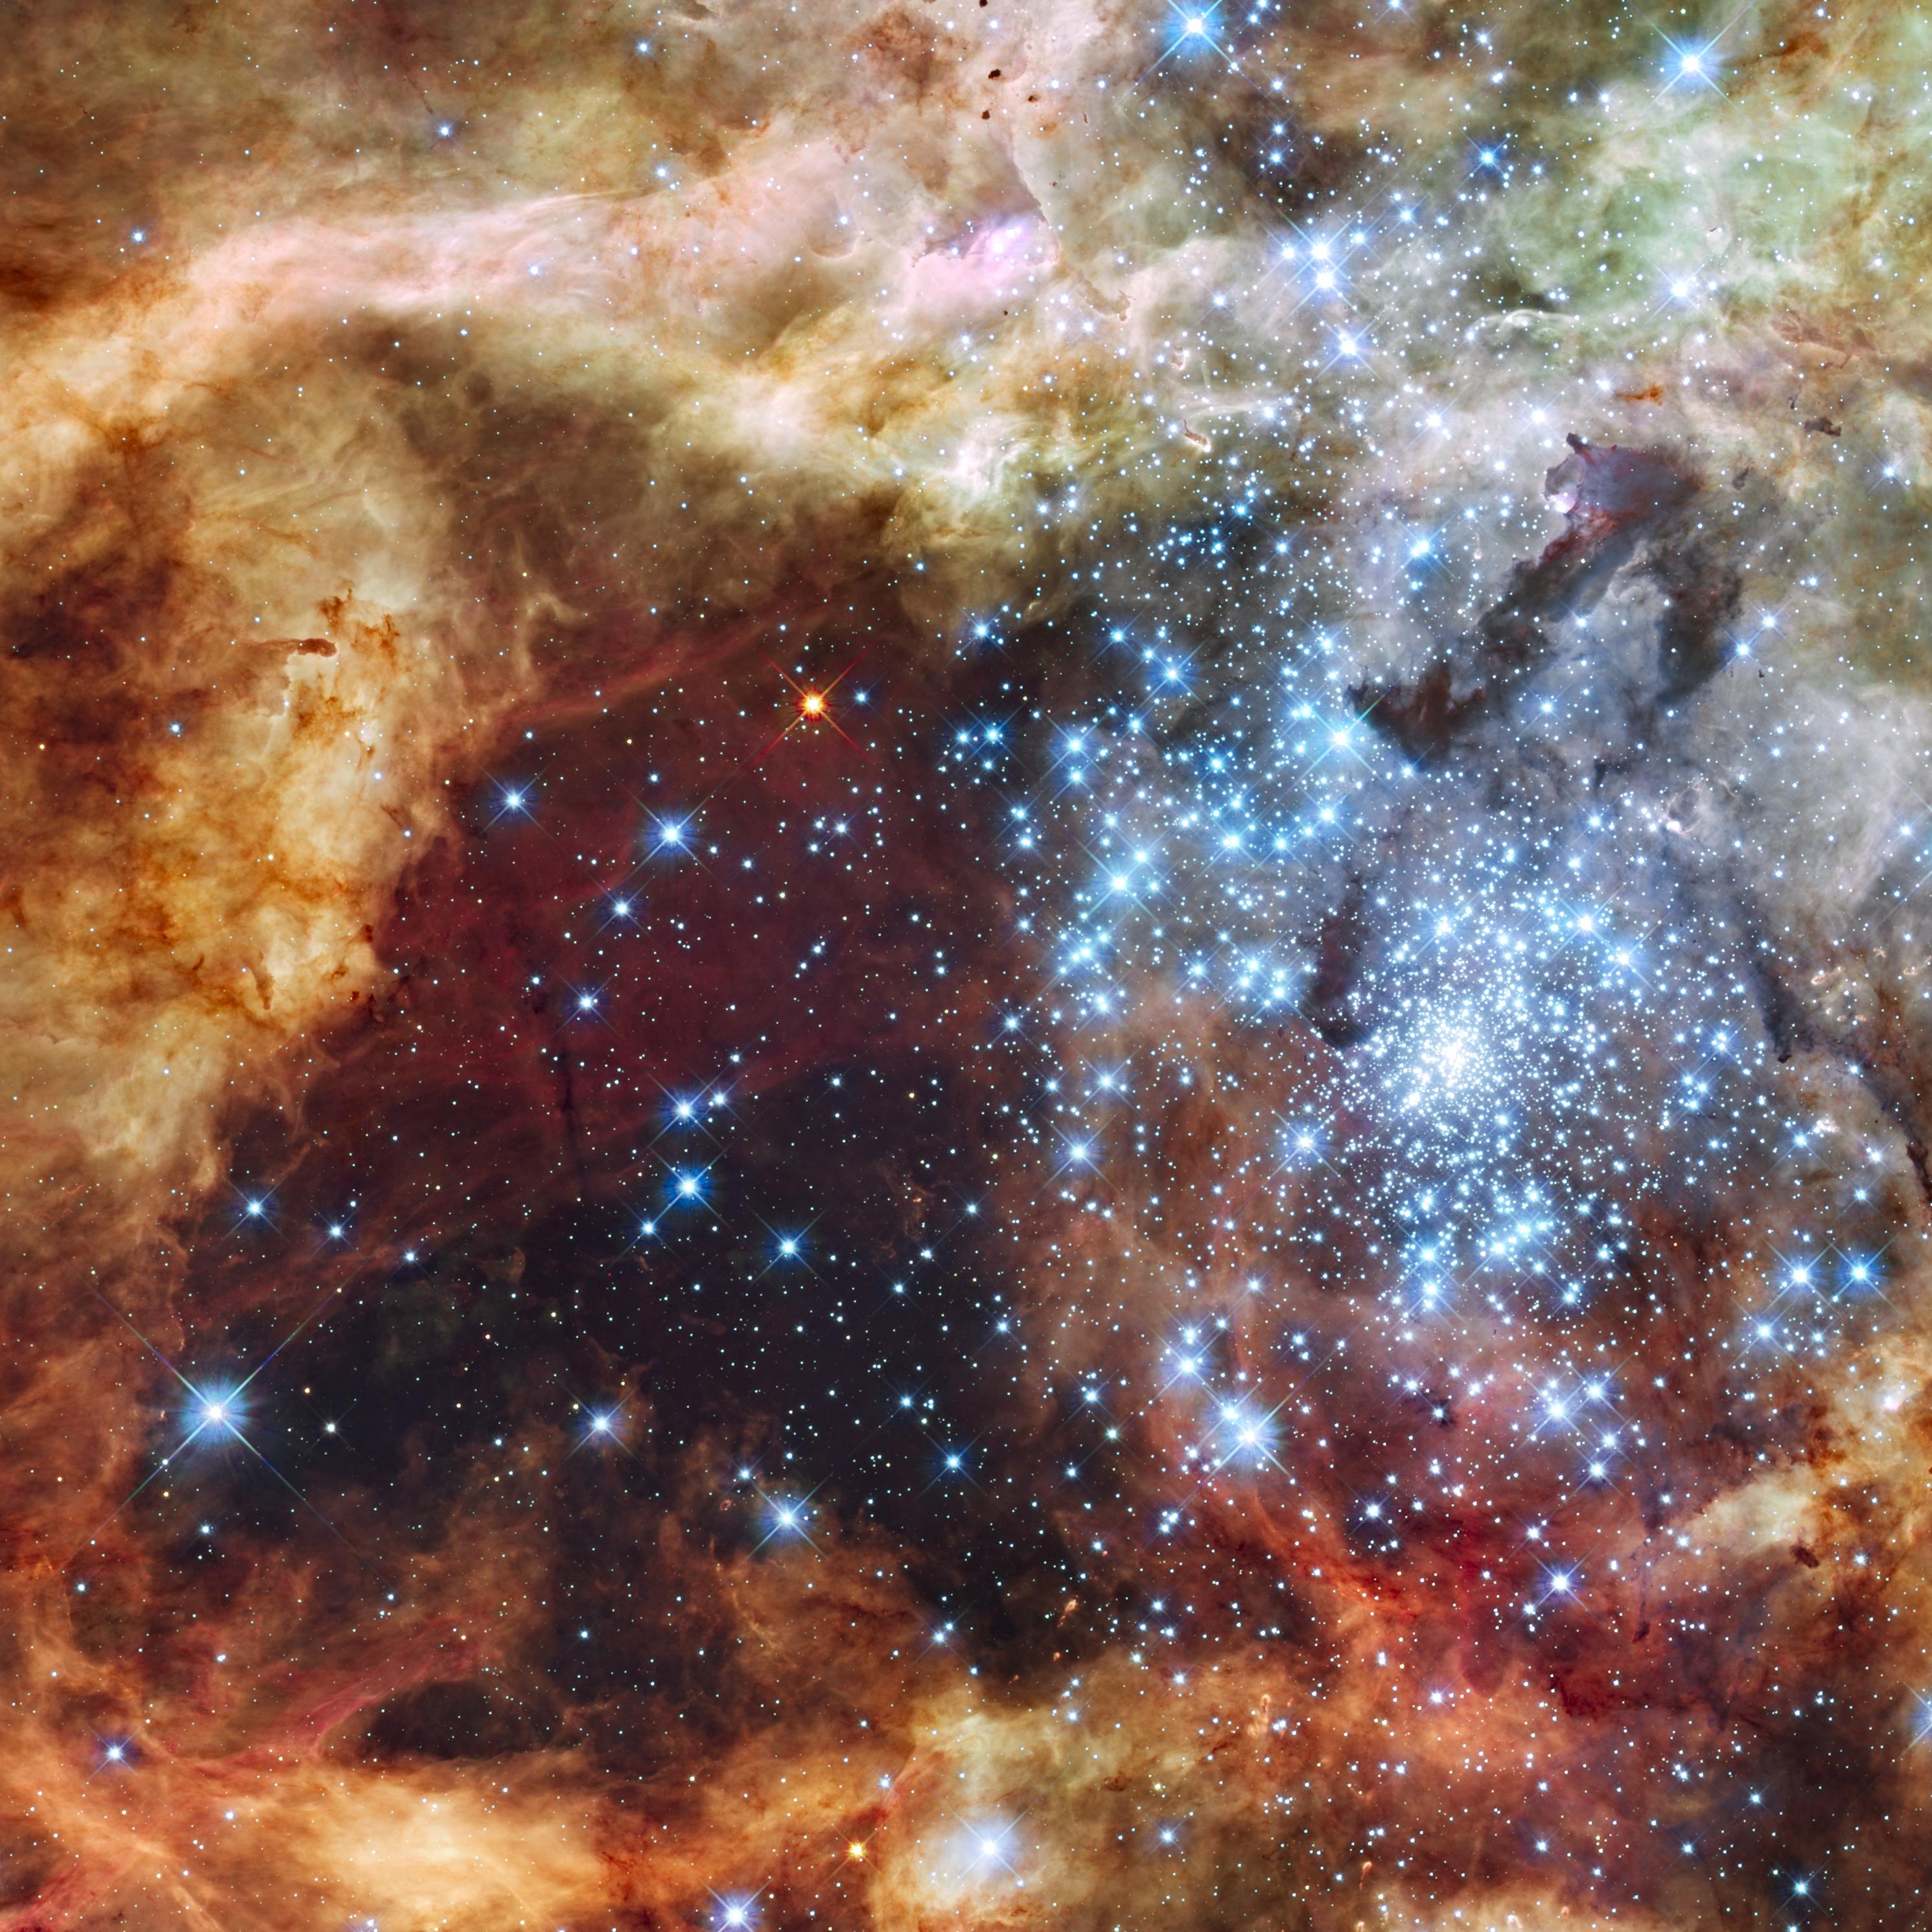 A colorful red, orange, and brown and dust cloud with a bright blue star cluster on the right side.